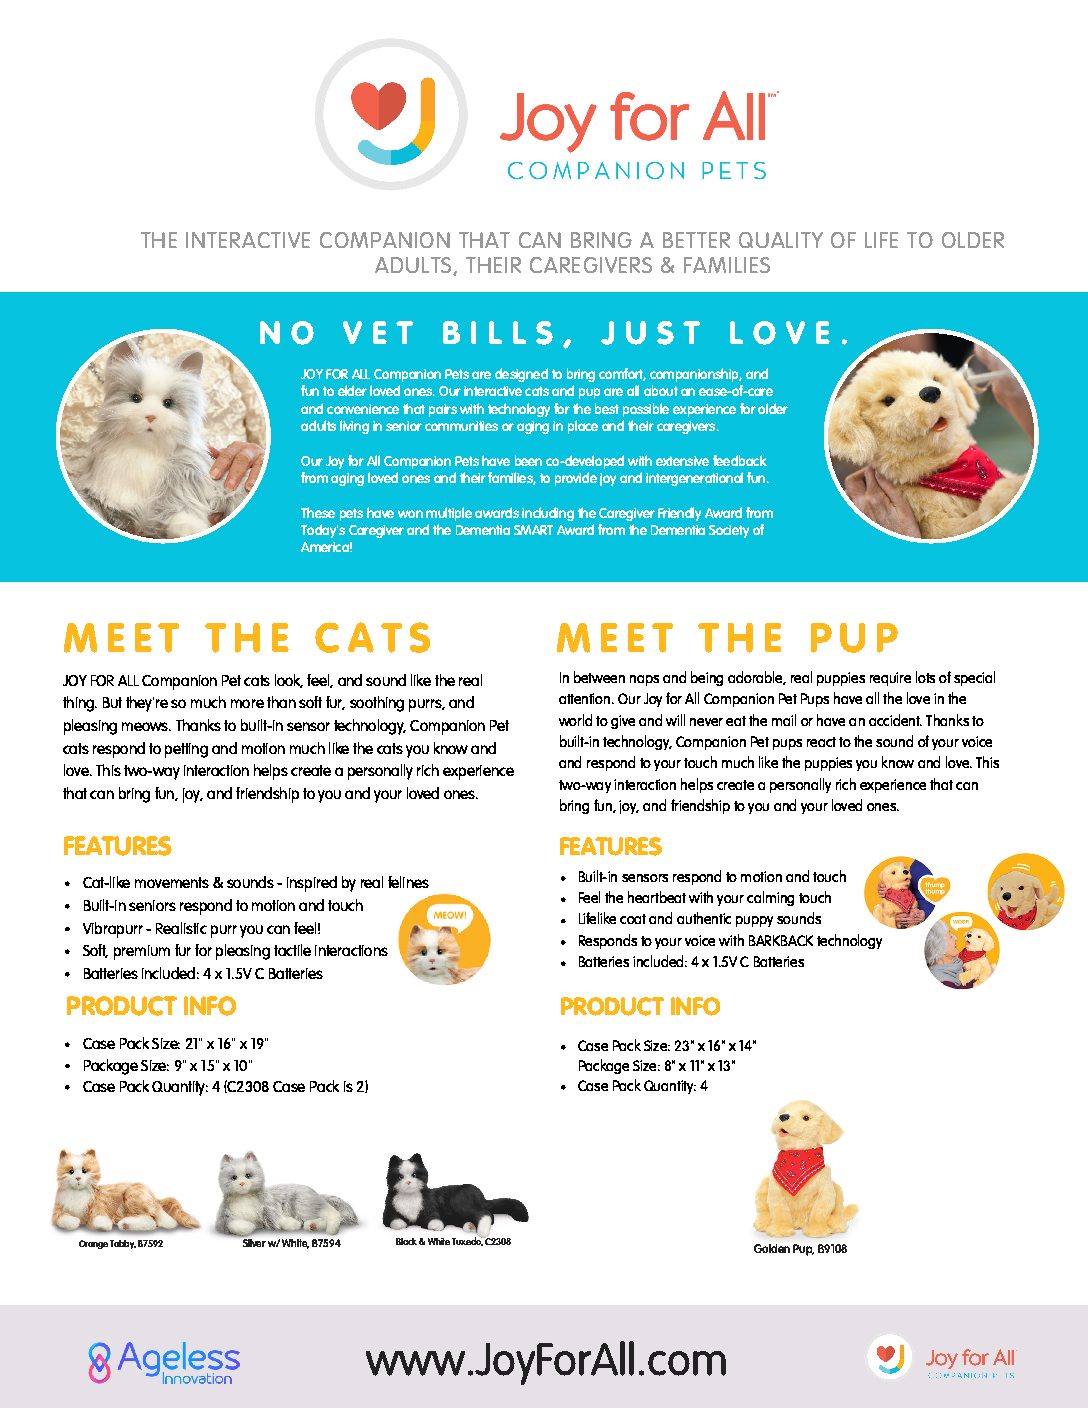 https://memorymatters.co.nz/wp-content/uploads/2020/08/1-Page-Cat-Pup-No-Pricing-1-pdf.jpg